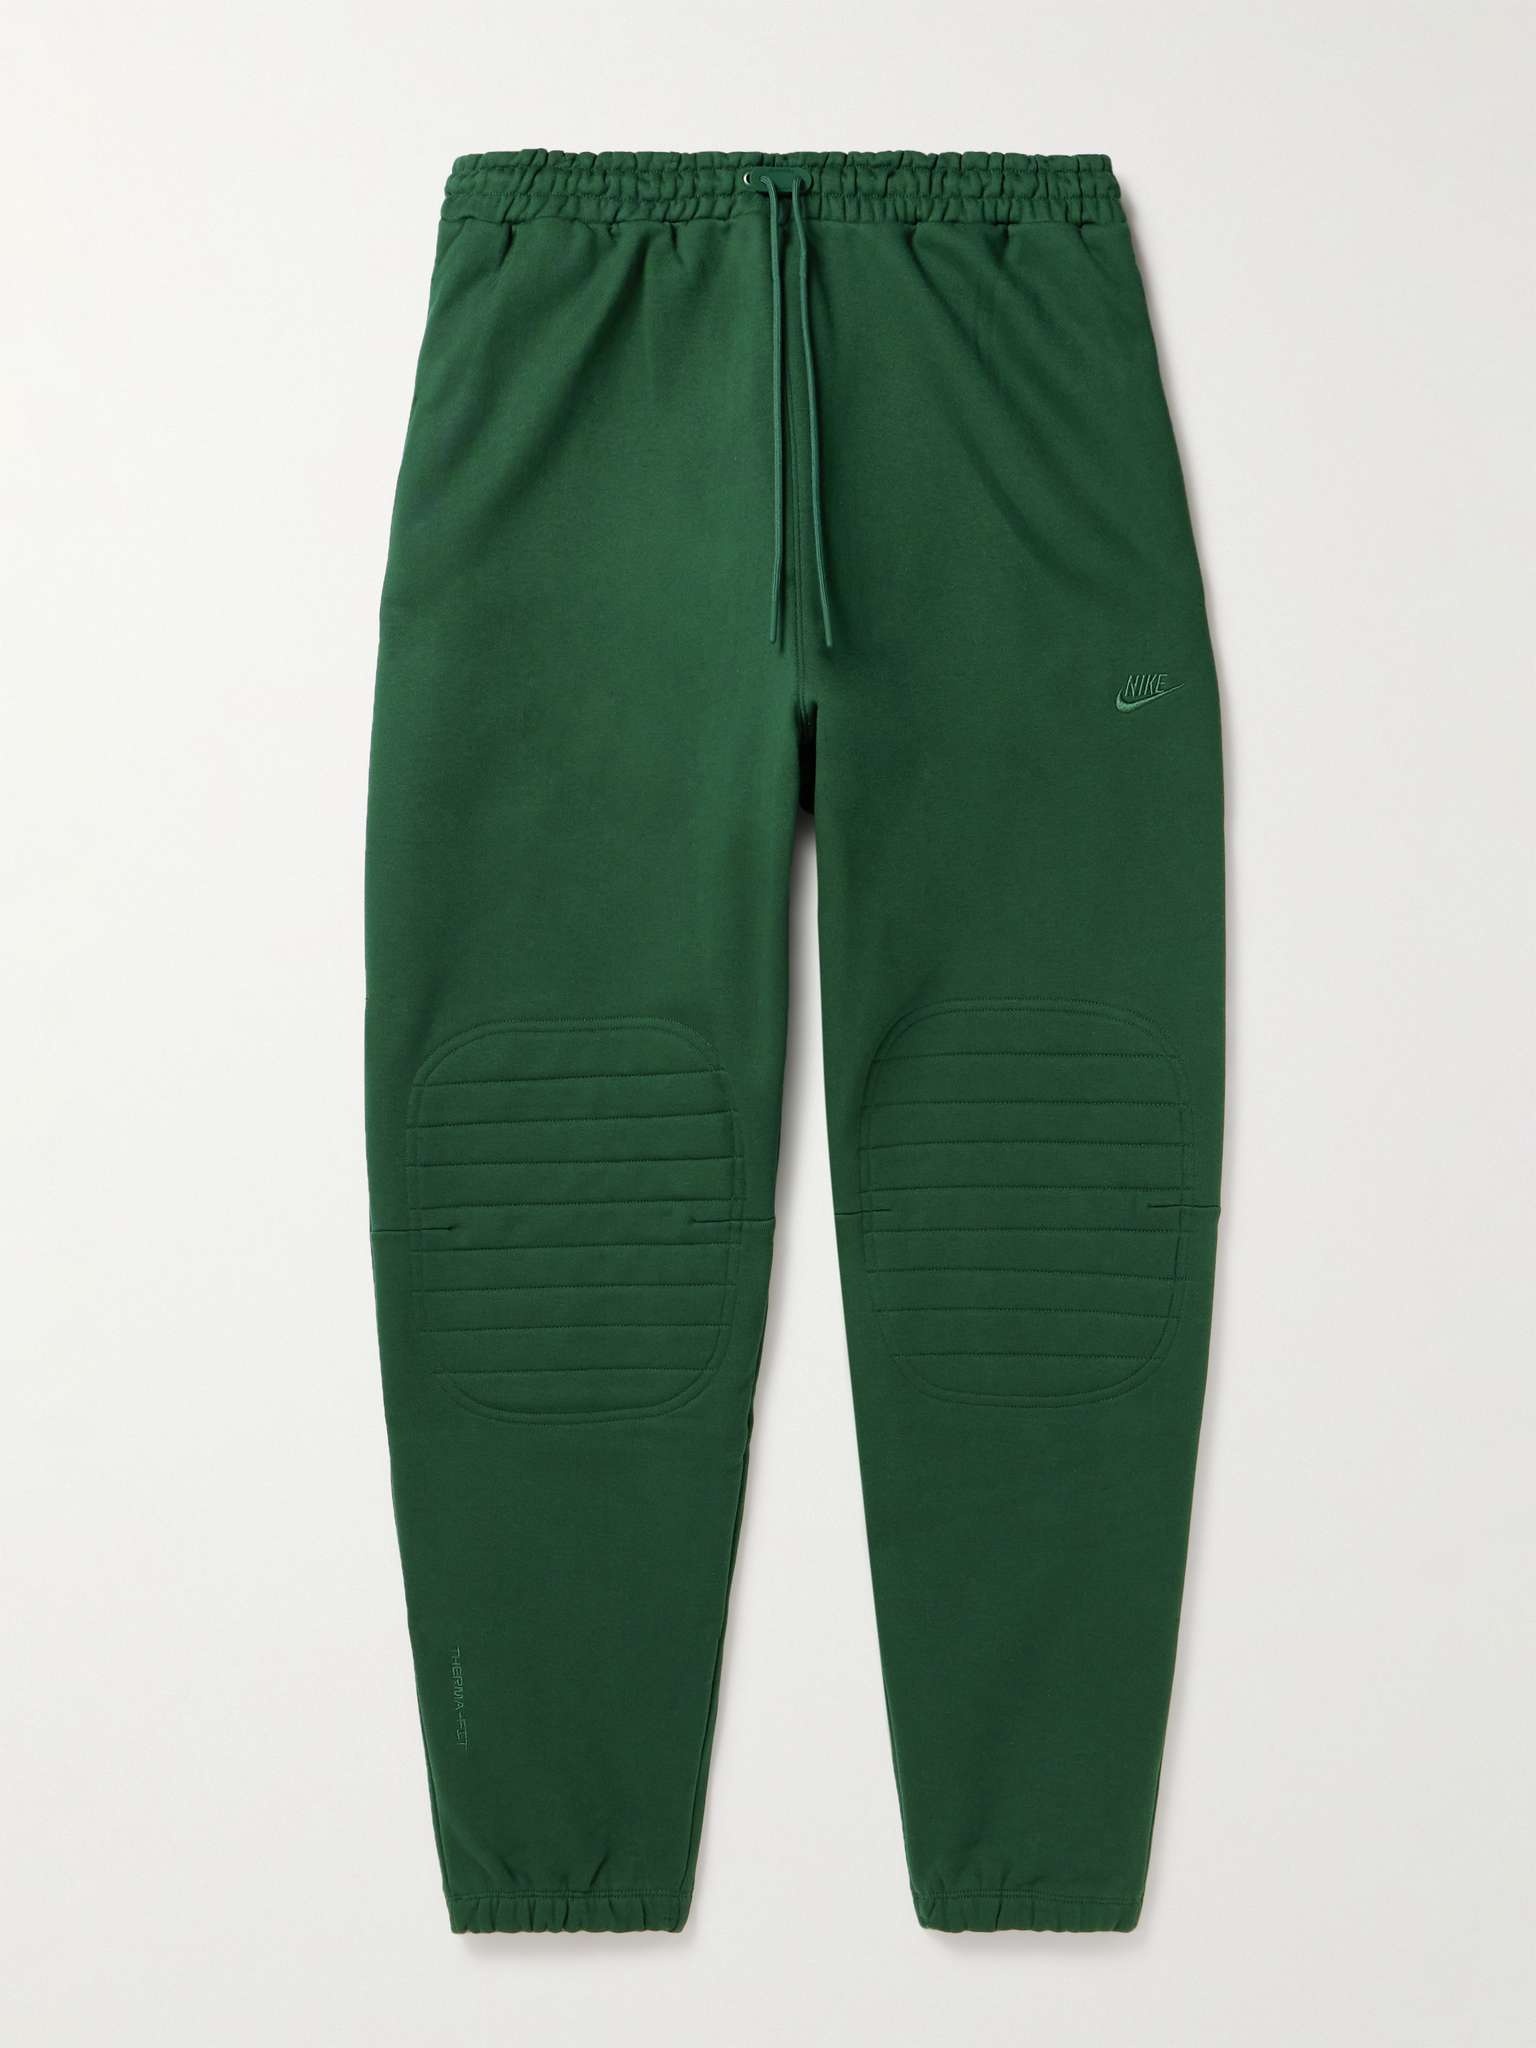 Sportswear Repel Tapered Therma-FIT Sweatpants - 1